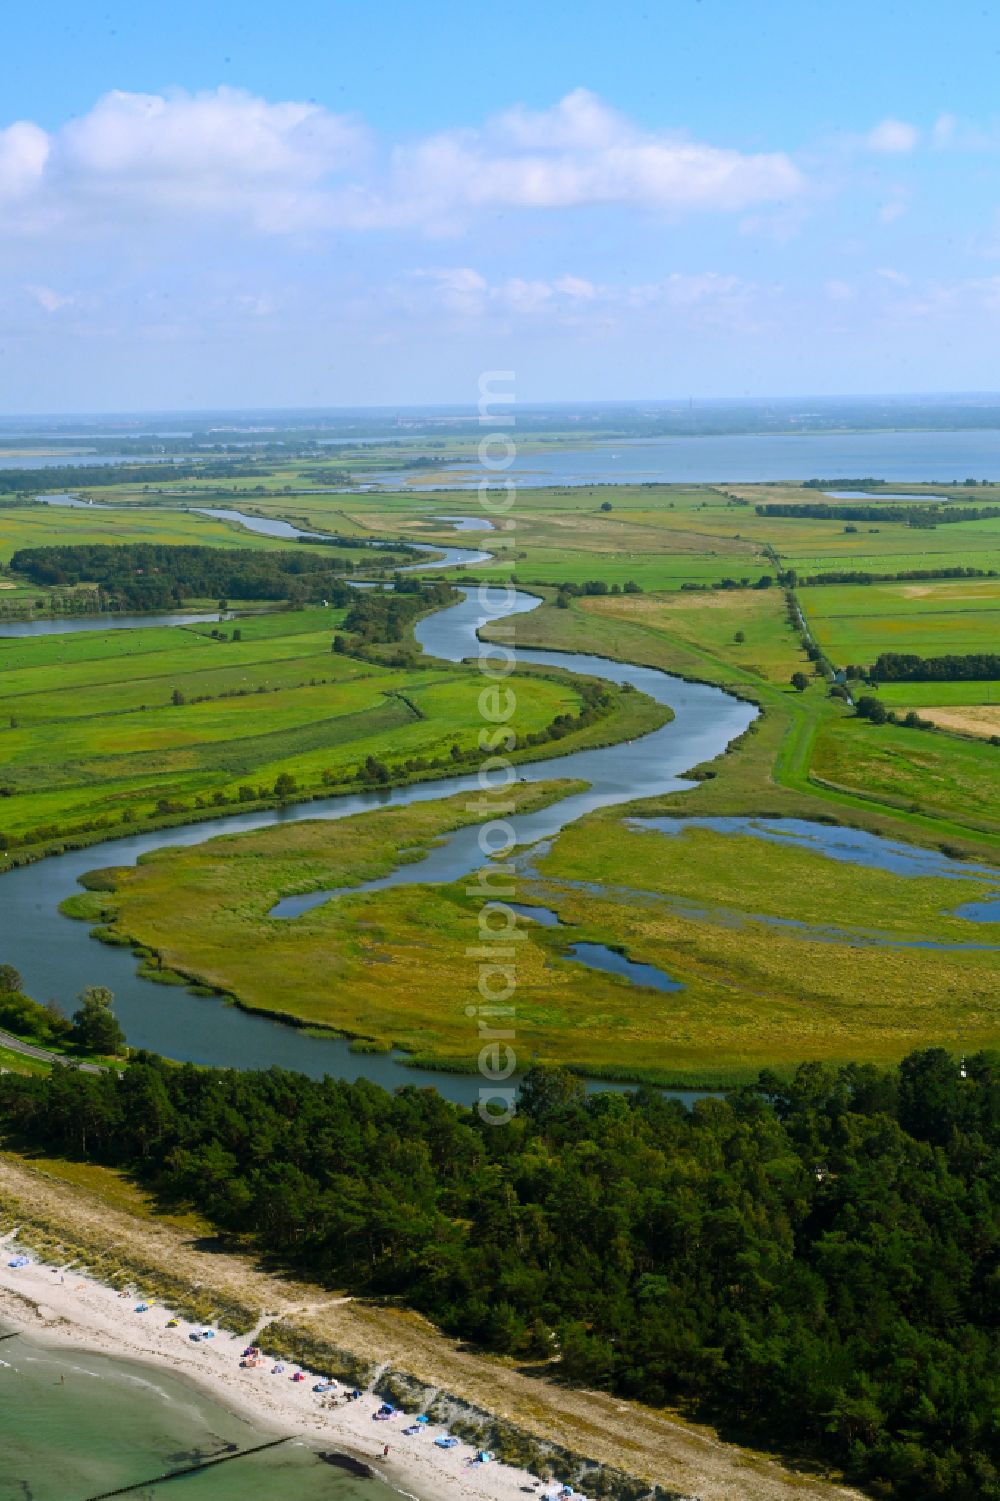 Aerial photograph Prerow - Meandering, serpentine curve of river Prerower Strom in Prerow in the state Mecklenburg - Western Pomerania, Germany